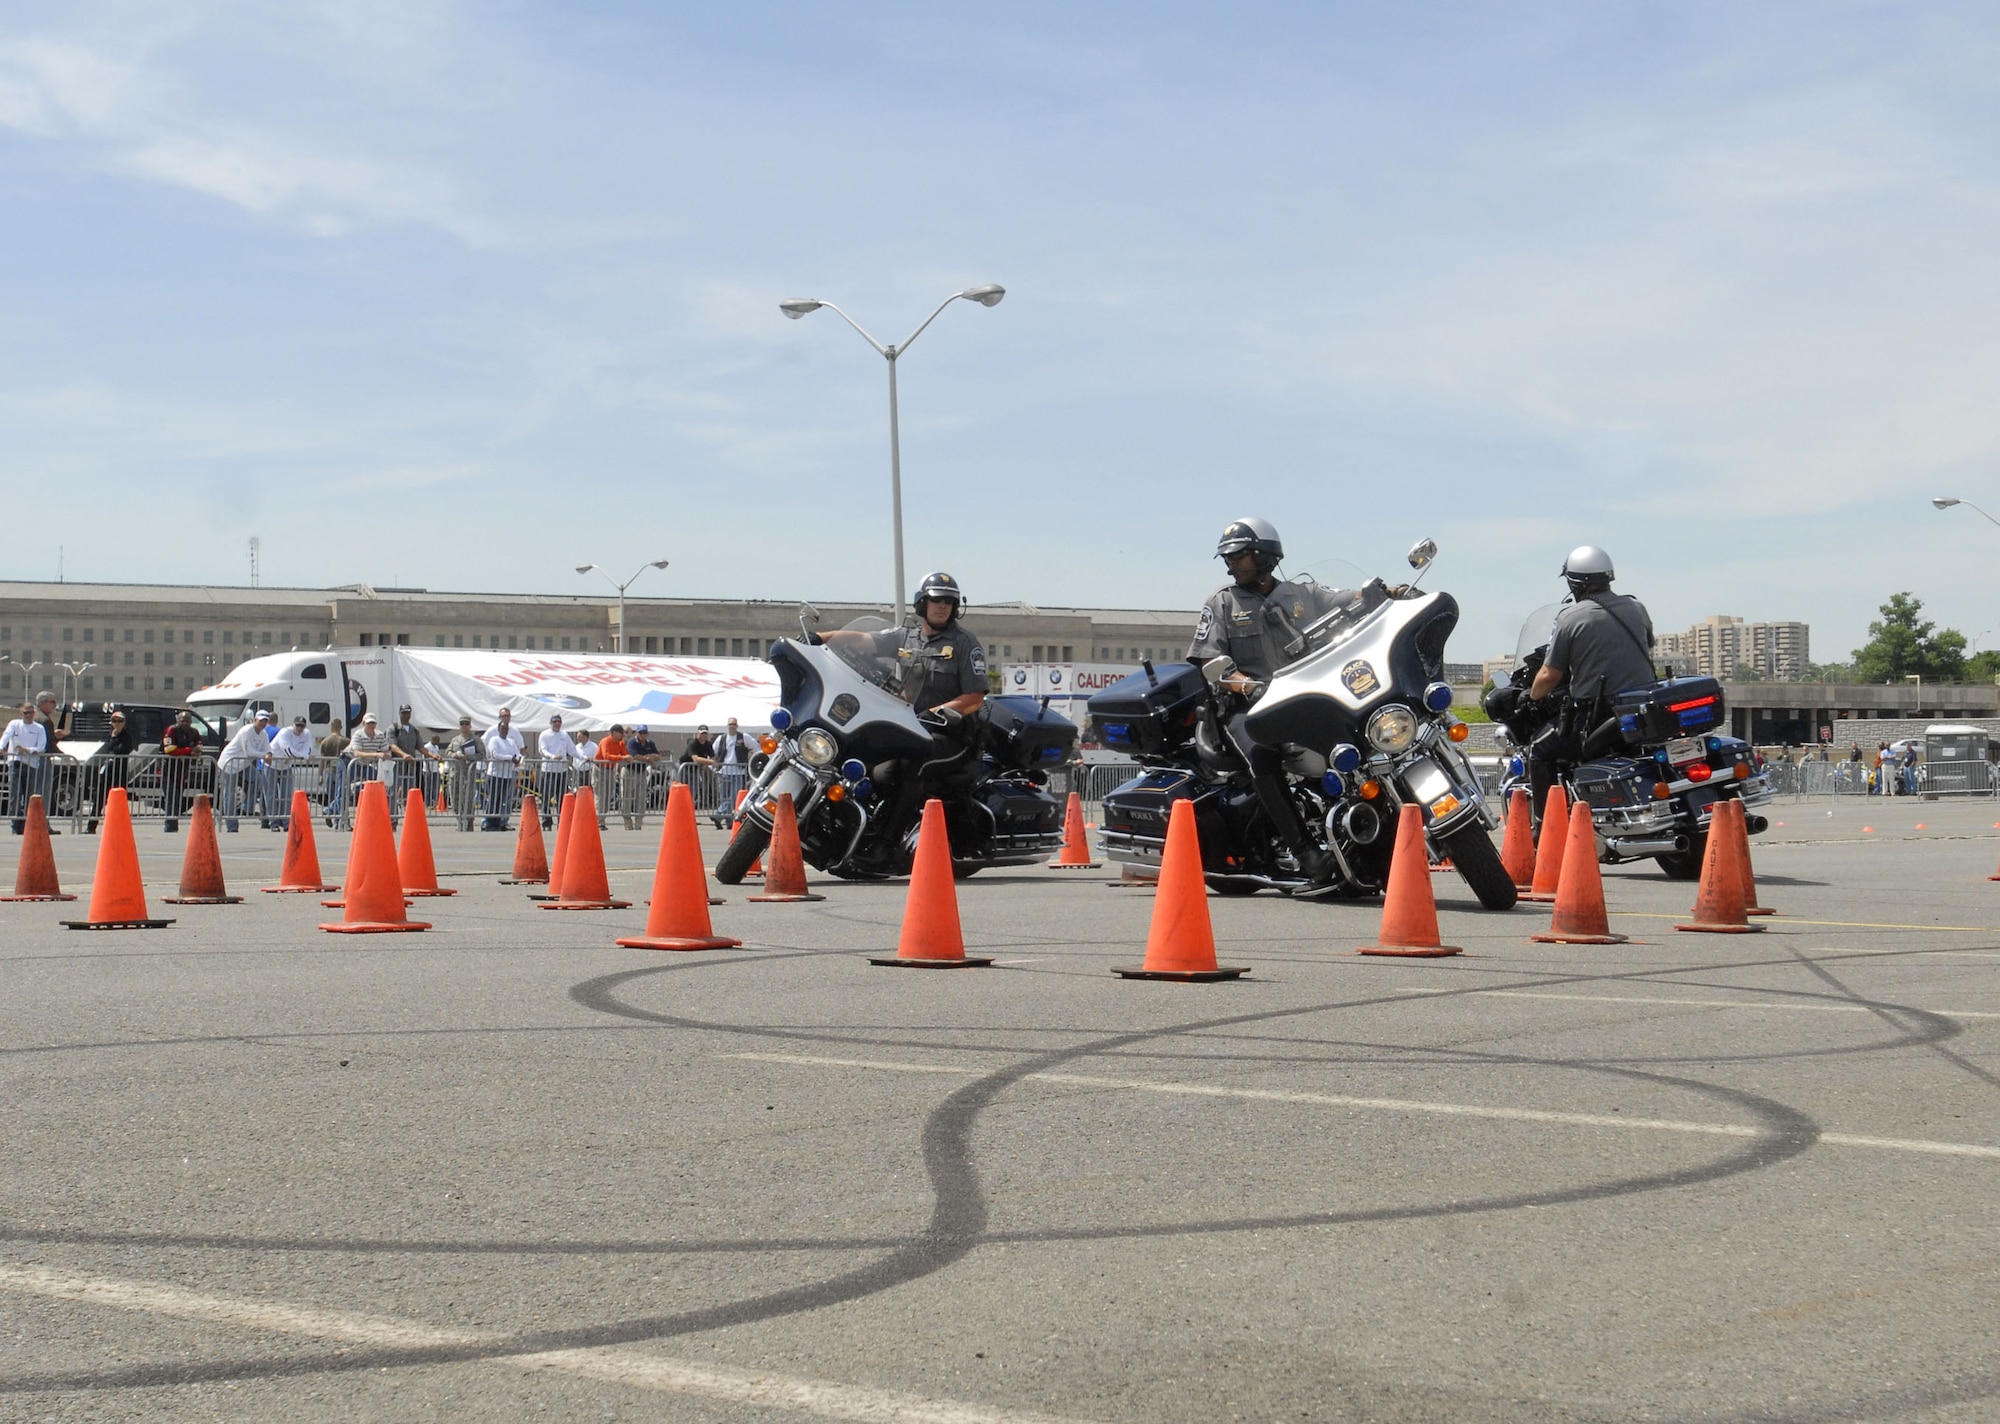 Pentagon Police perform a riding skill demonstration during the Pentagon Motorcycle Safety Event, May 7, 2010, in the Pentagon North Parking lot.  The event is to help enhance motorcyle safety awareness for new, old and non riders.  (Defense Department photo/Petty Officer 1st Class Molly A. Burgess)